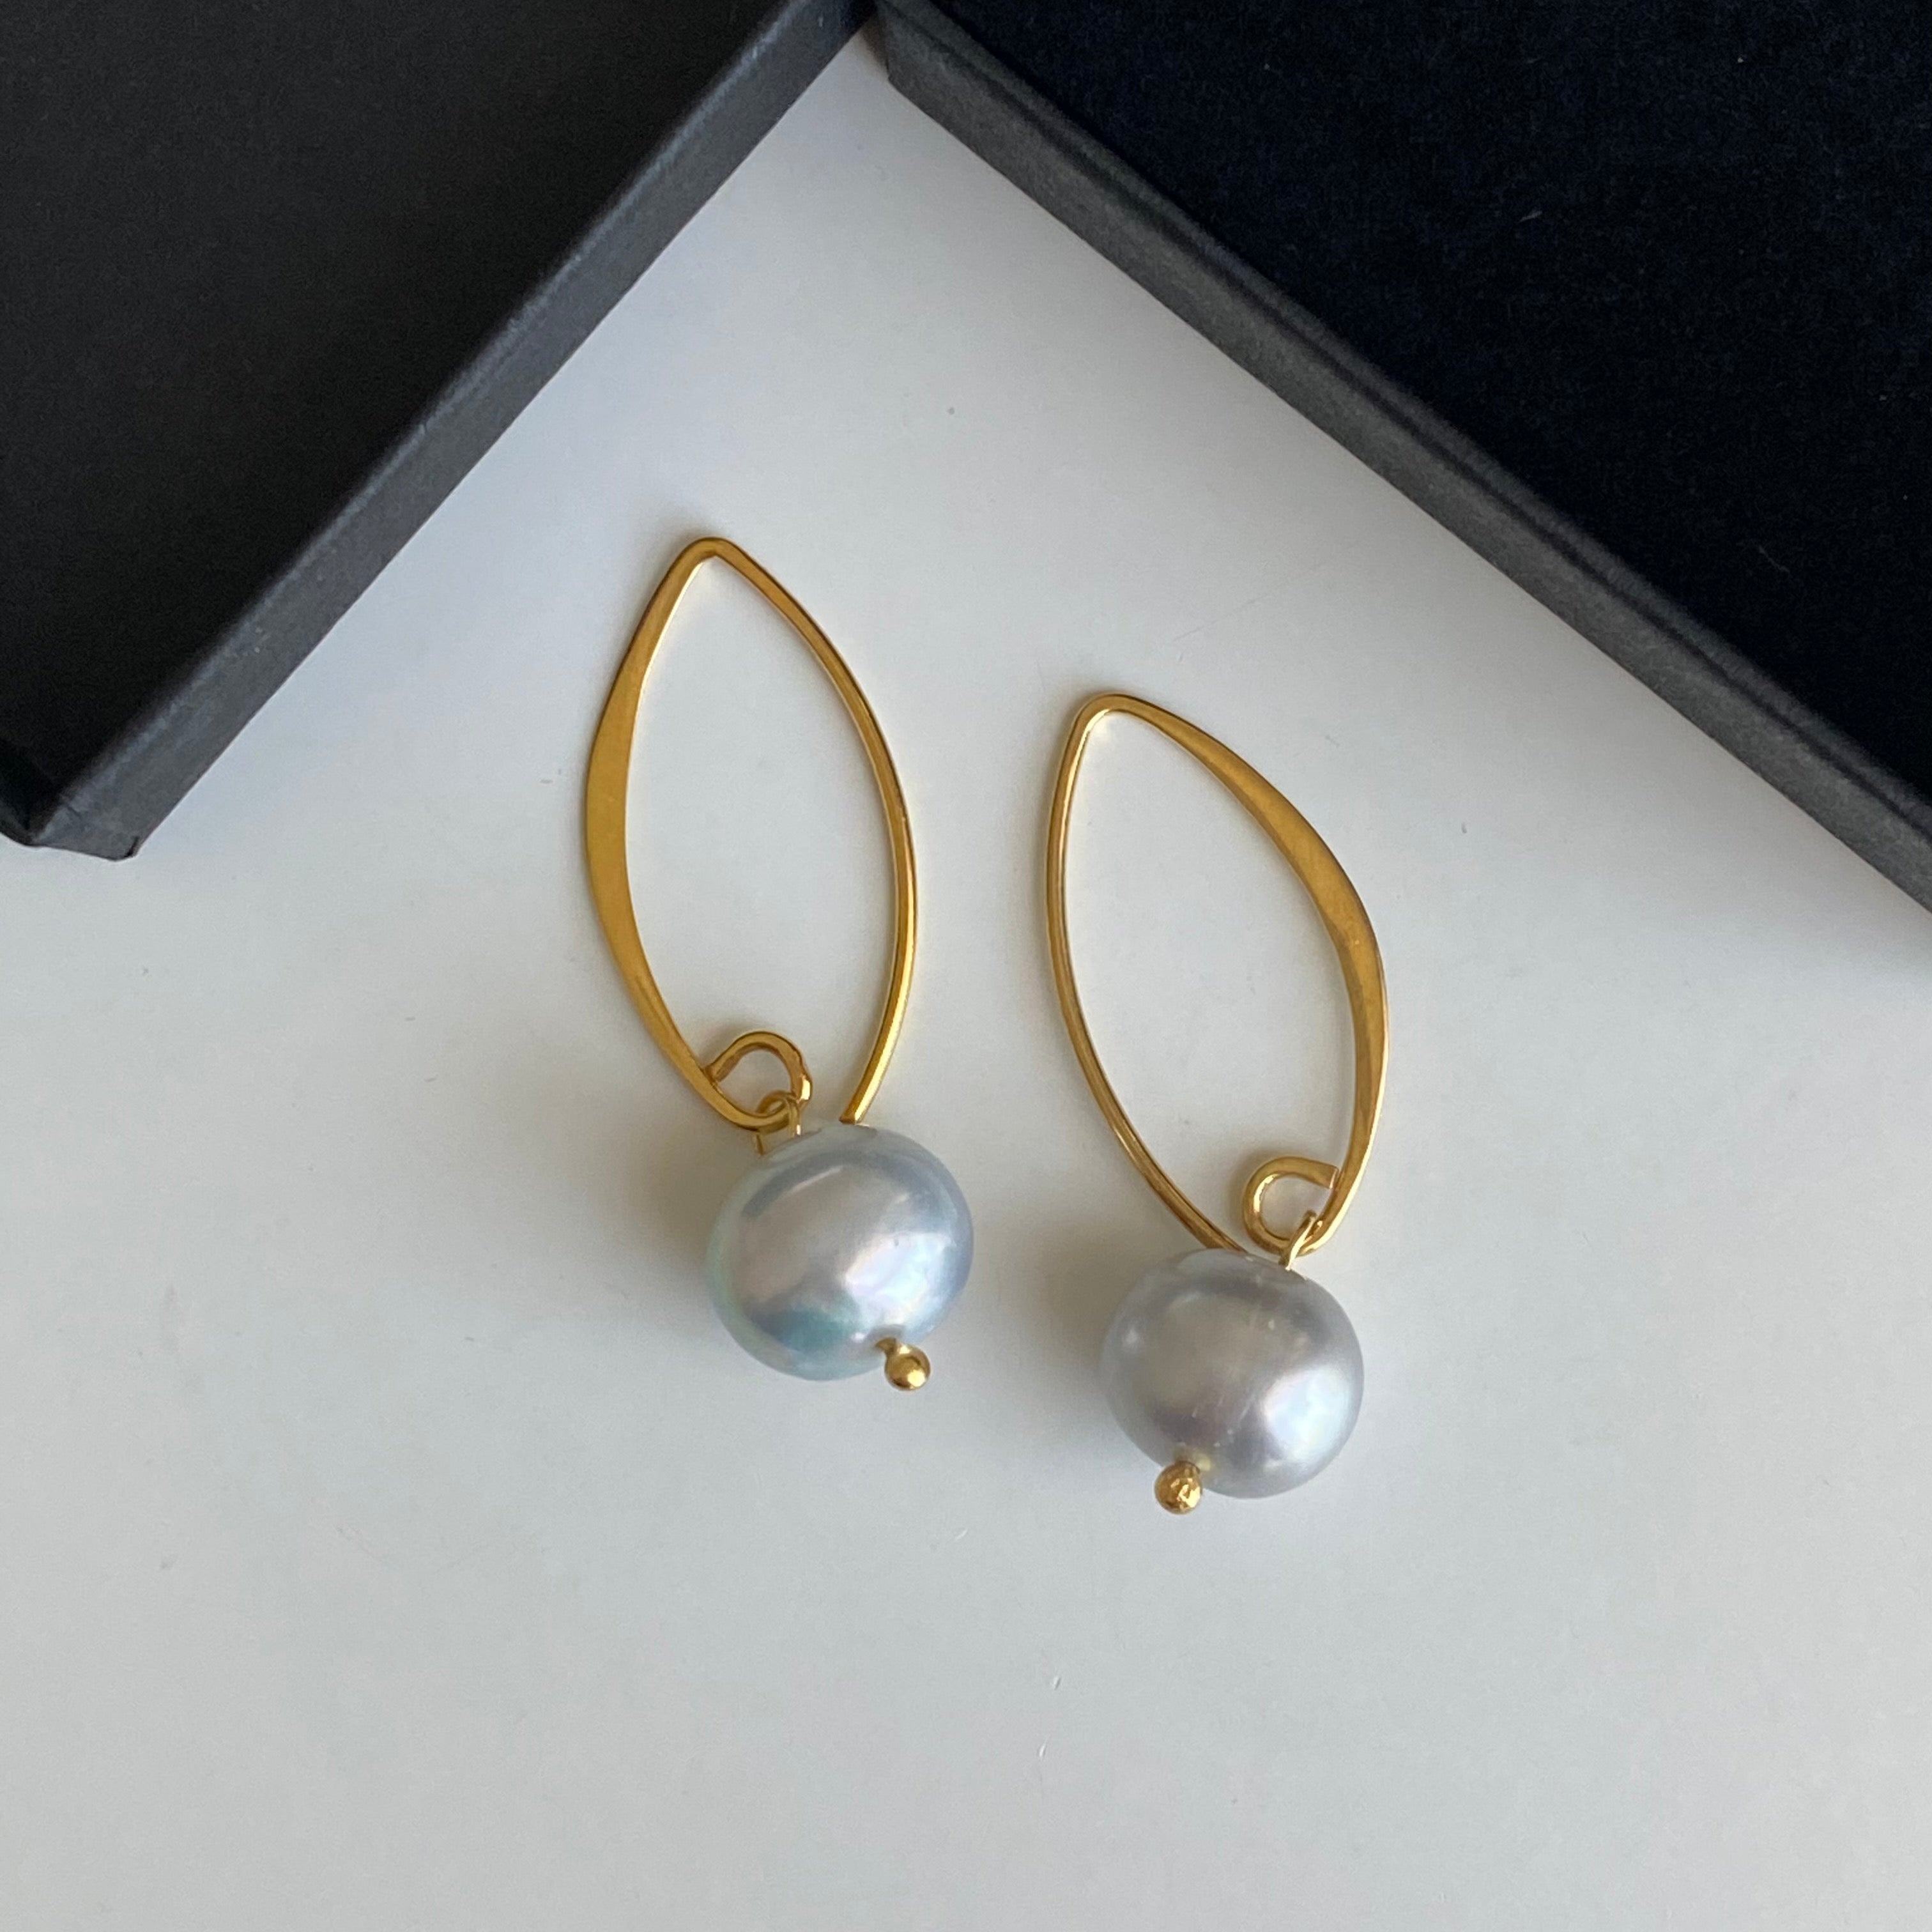 Gold Plated Sterling Silver Threader Earrings - Grey Pearl